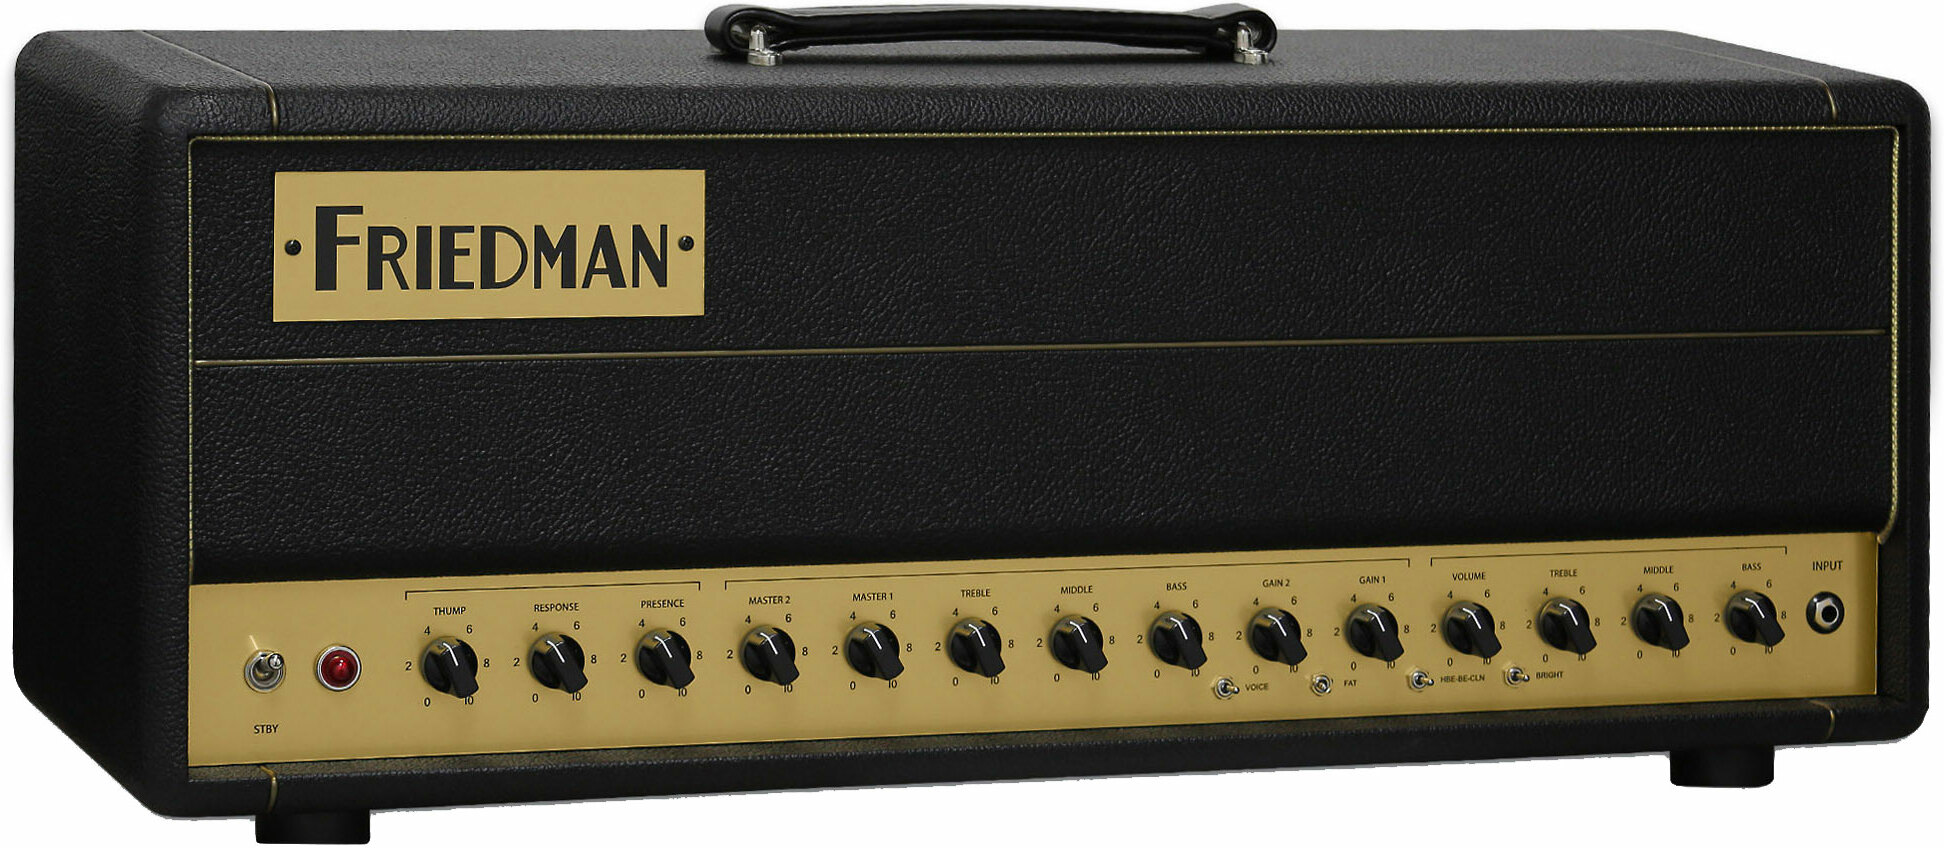 Friedman Amplification Be 50 Deluxe Head 25/50w - Electric guitar amp head - Main picture